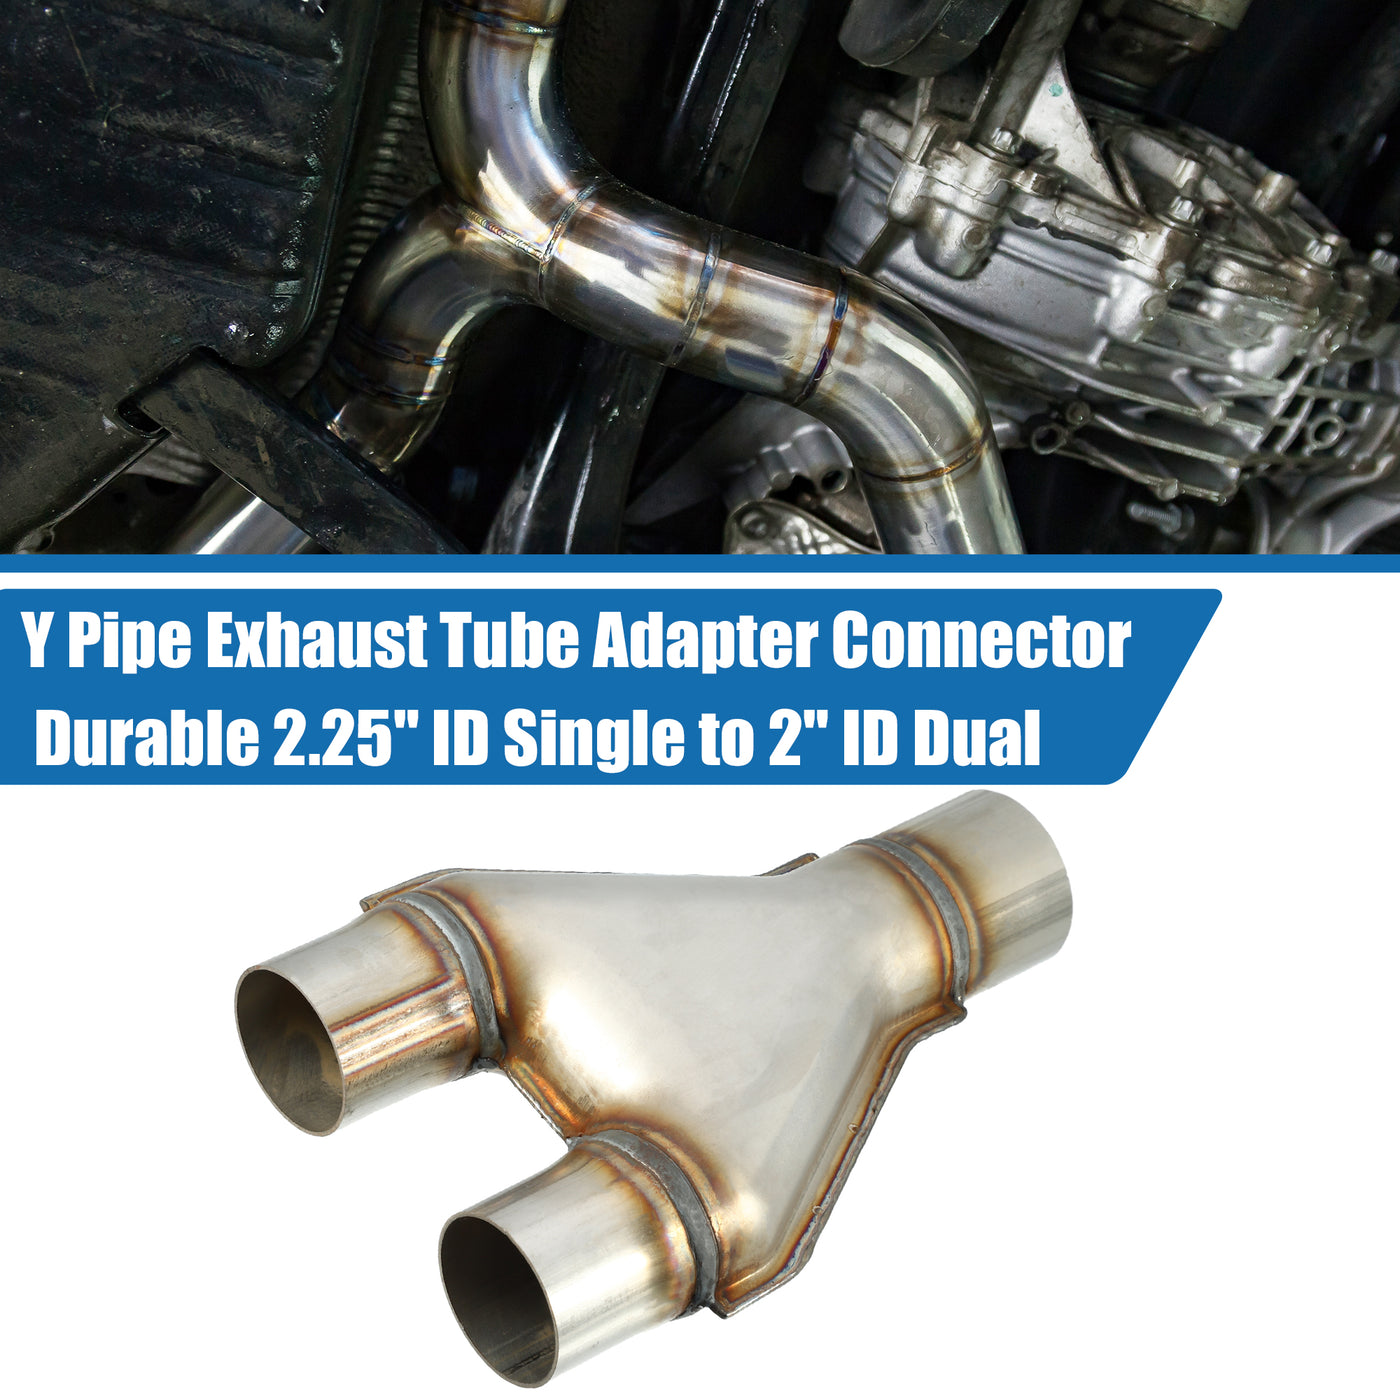 A ABSOPRO Y Pipe Exhaust Tube Adapter Connector Durable 2.25" ID Single to 2" ID Dual Exhaust Adapter Connector 10 Inch Overall Length T409 Stainless Steel Silver Tone